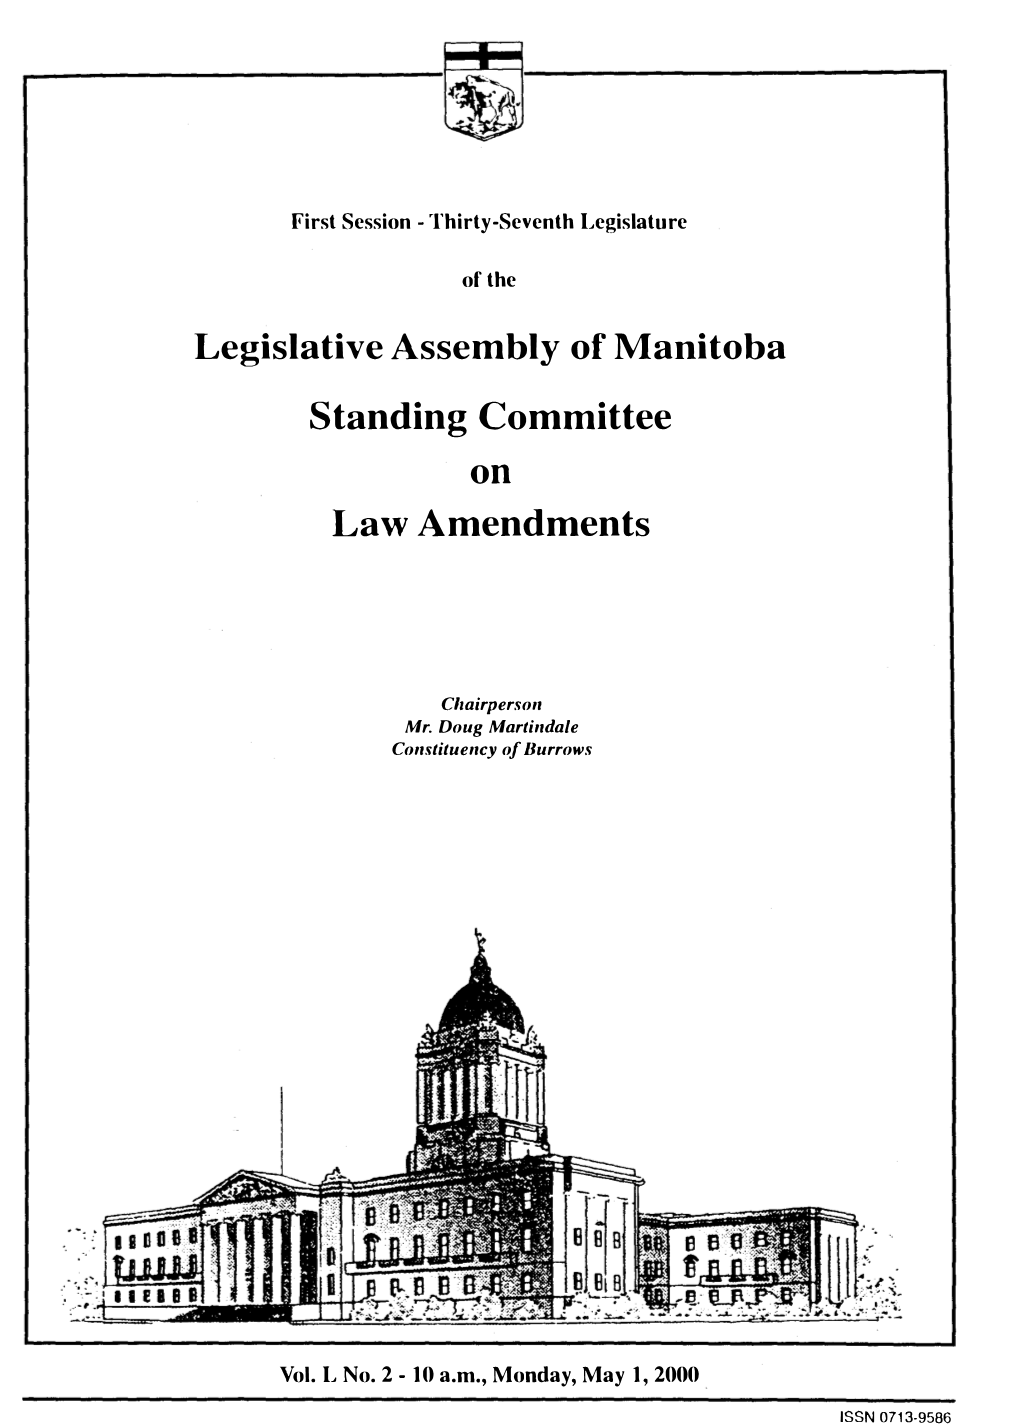 Legislative Assembly of Manitoba Standing Committee on Law Amendments